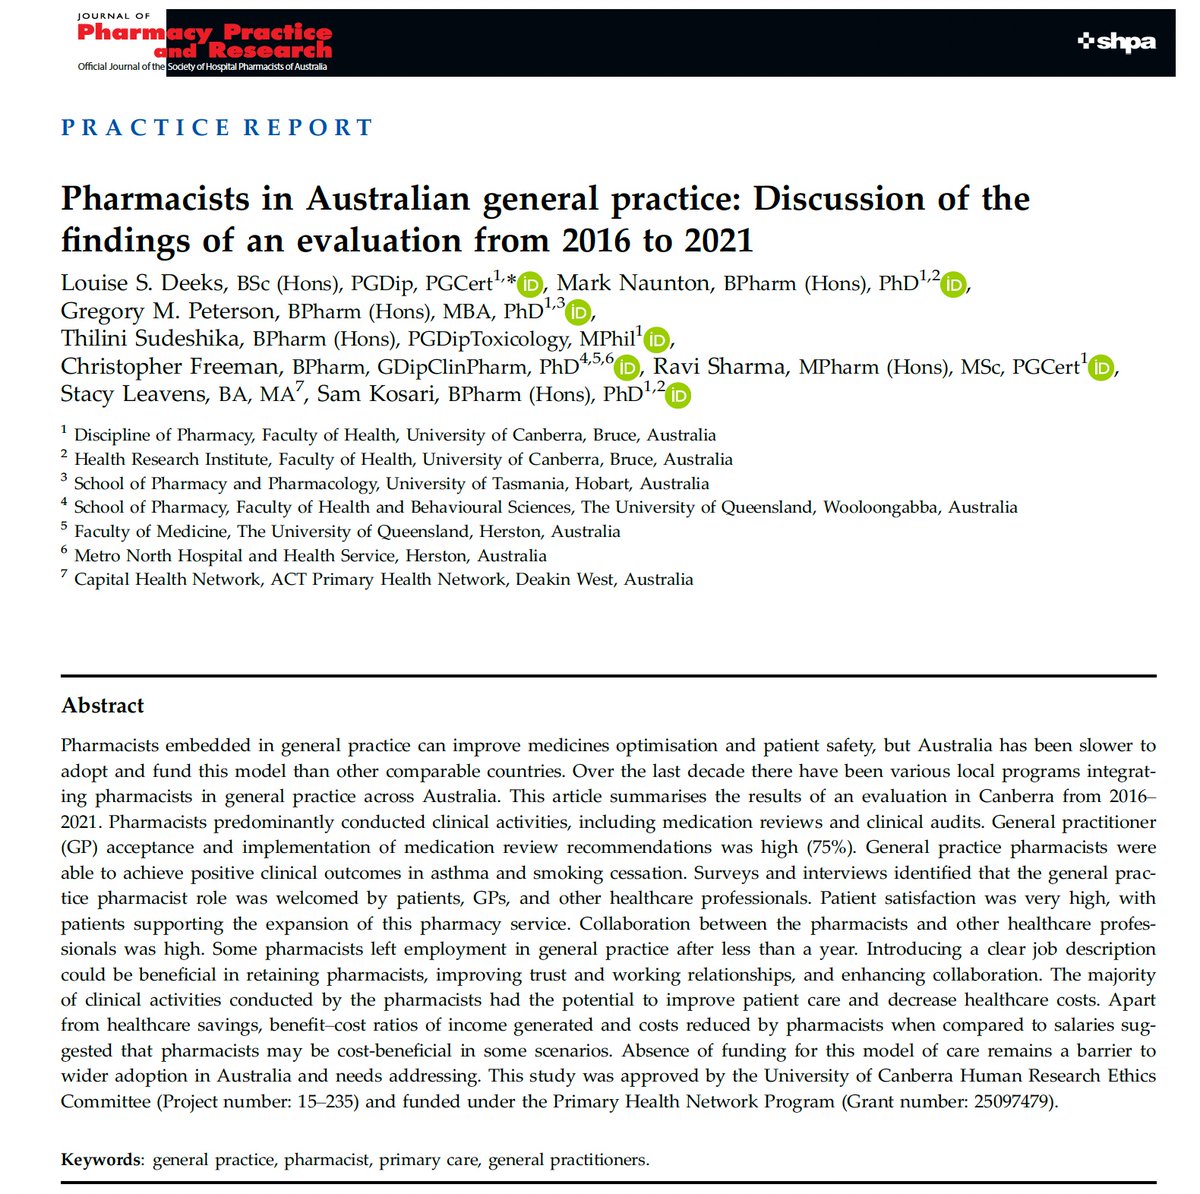 Just published: discussion about findings from our evaluation into #Pharmacists in #generalpractice in #Canberra See paper in #JPPR onlinelibrary.wiley.com/doi/10.1002/jp… @MarkNaunton @TSudeshika @RSharmaPharma @gregorymark31 @CapitalHealthNw @SamKosari @topherfreeman @UniCanberra @the_shpa